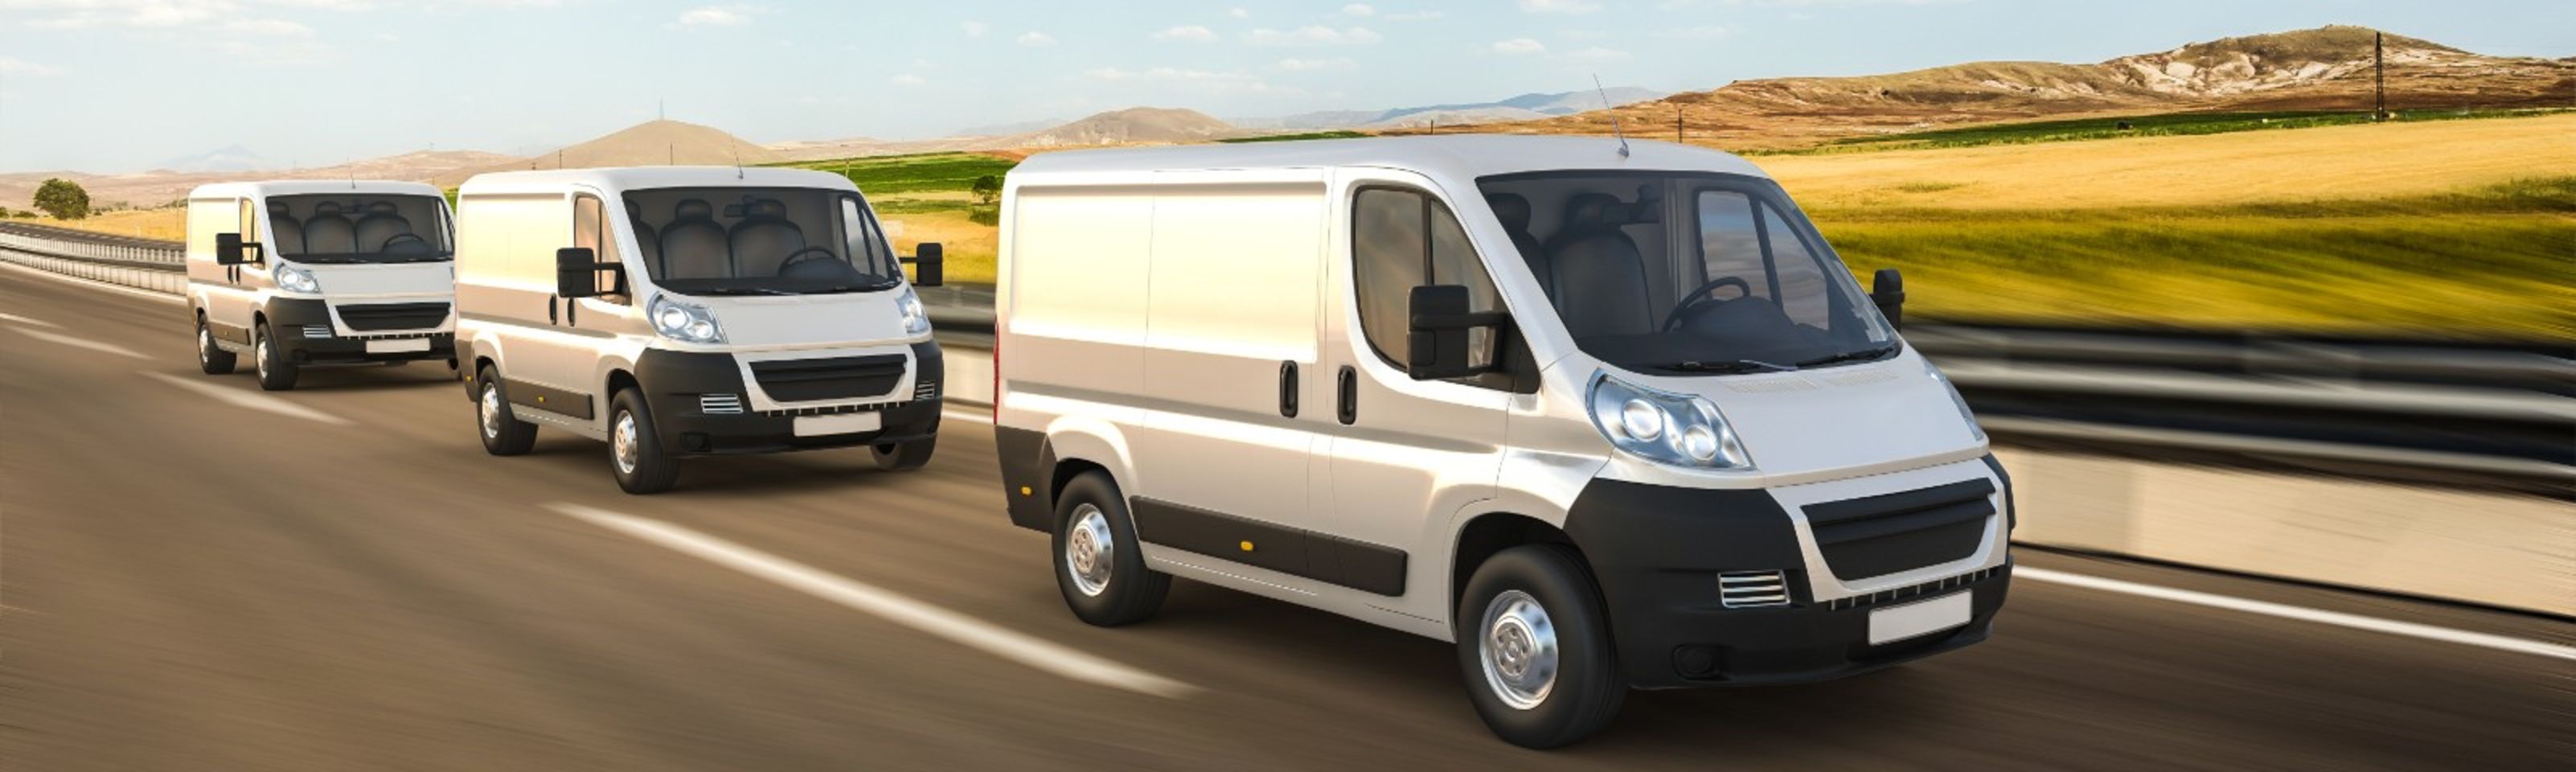 New rules for operators of Light Goods Vehicles in Europe